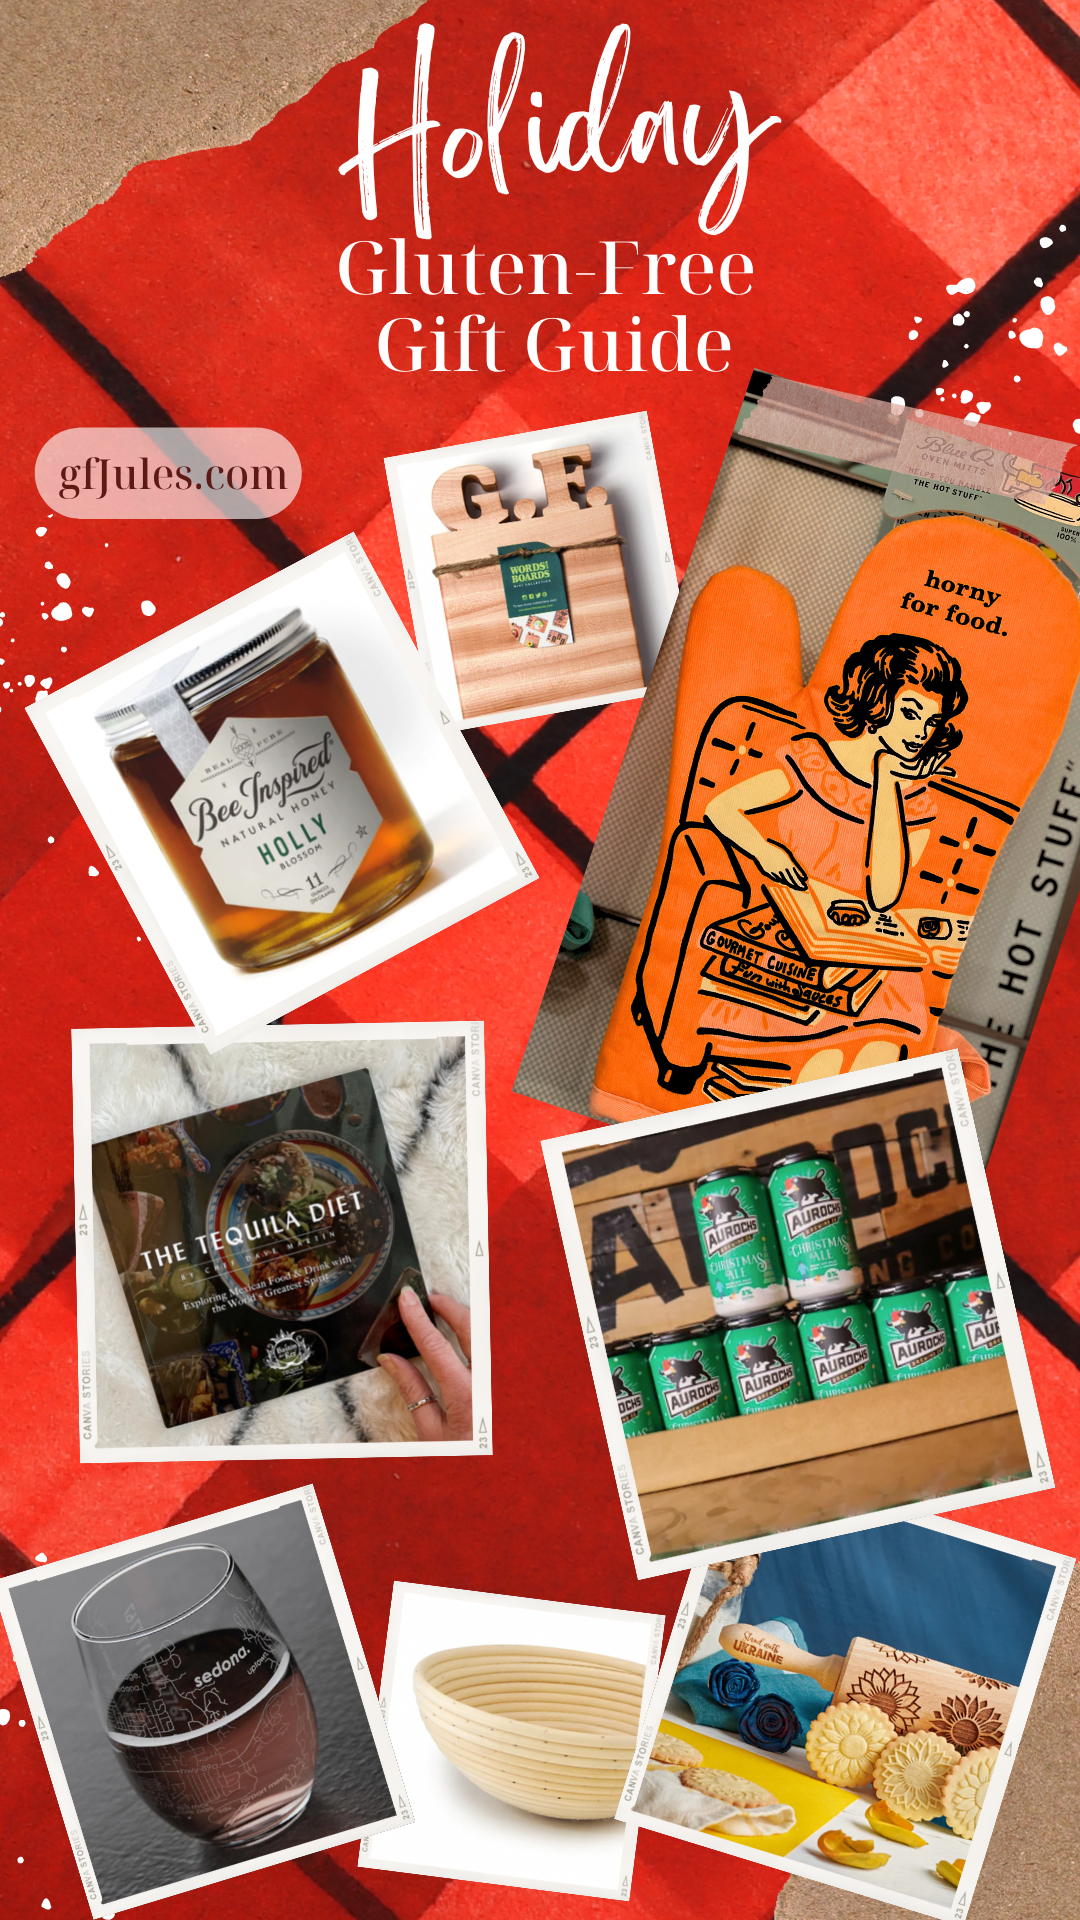 gfJules Gluten Free Holiday Gift Guide 2022